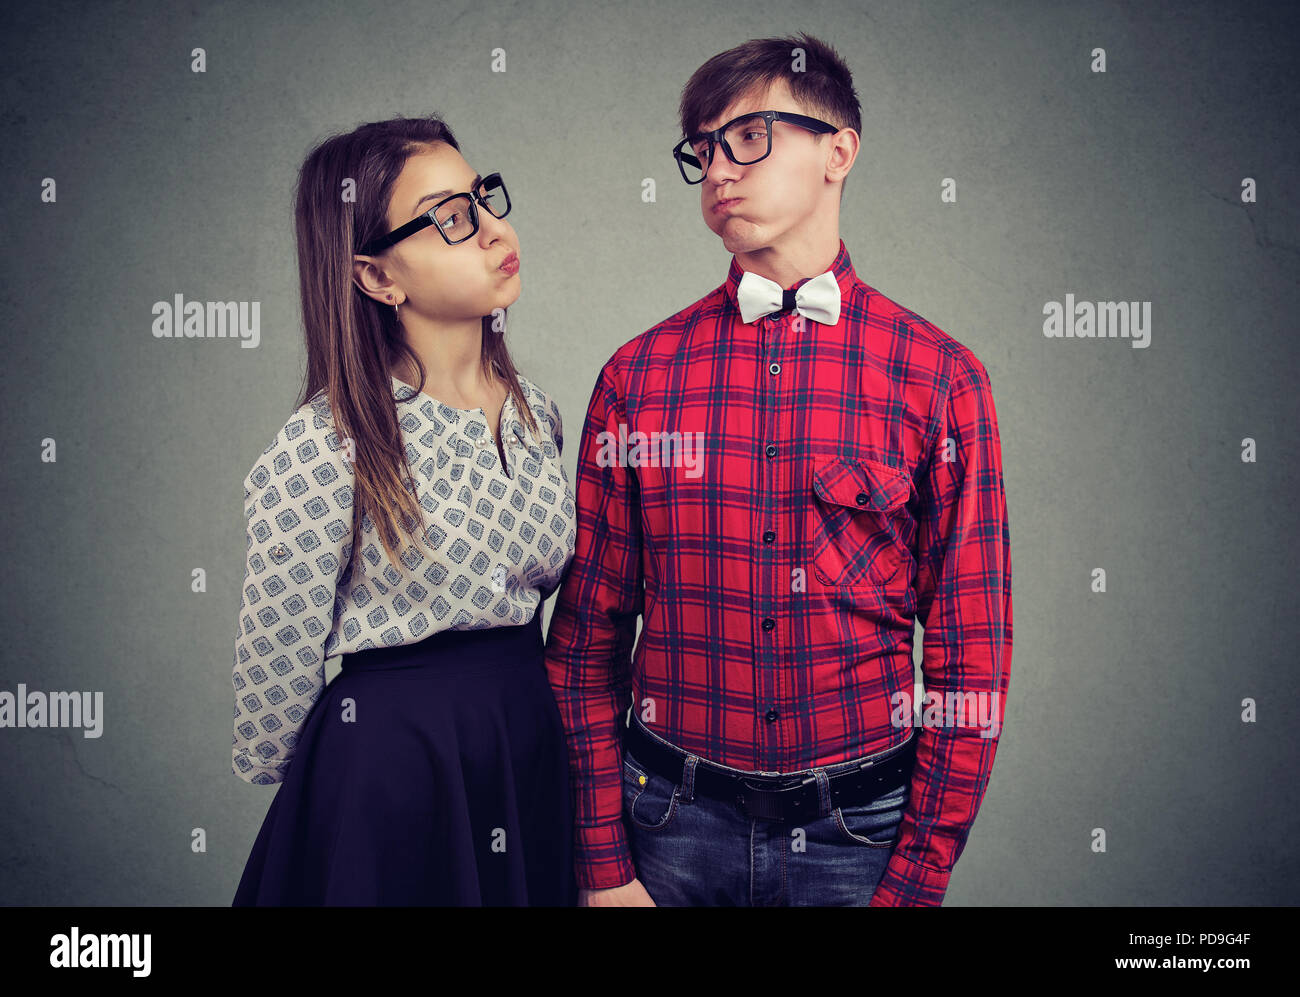 Young man and woman in couple making expression of disagreement and offense while looking at each other on gray background Stock Photo